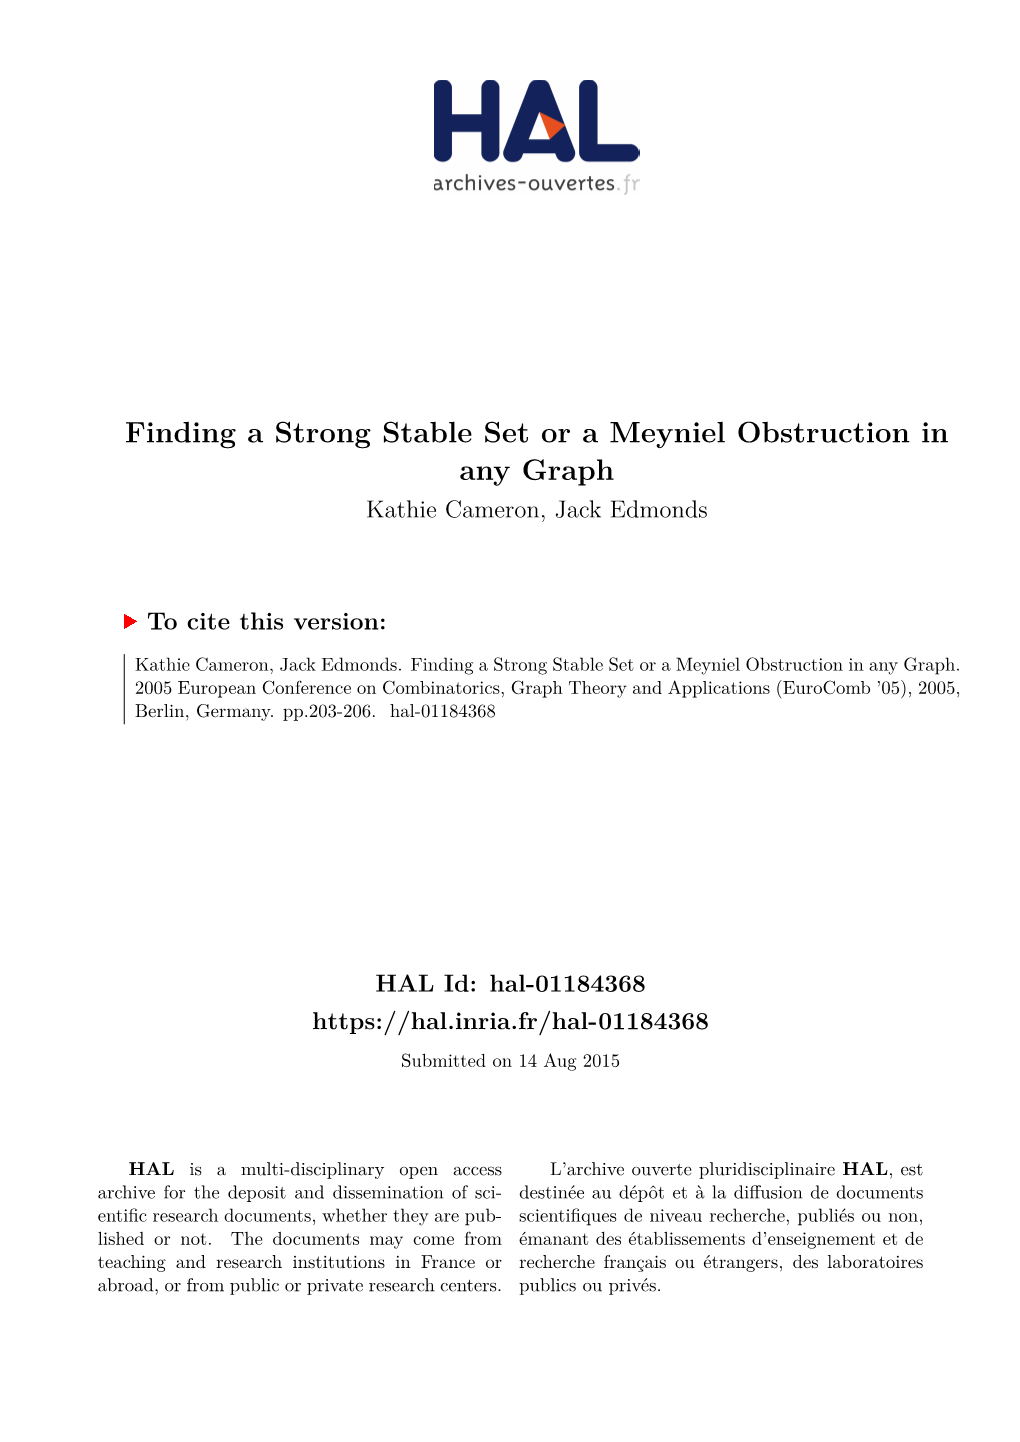 Finding a Strong Stable Set Or a Meyniel Obstruction in Any Graph Kathie Cameron, Jack Edmonds